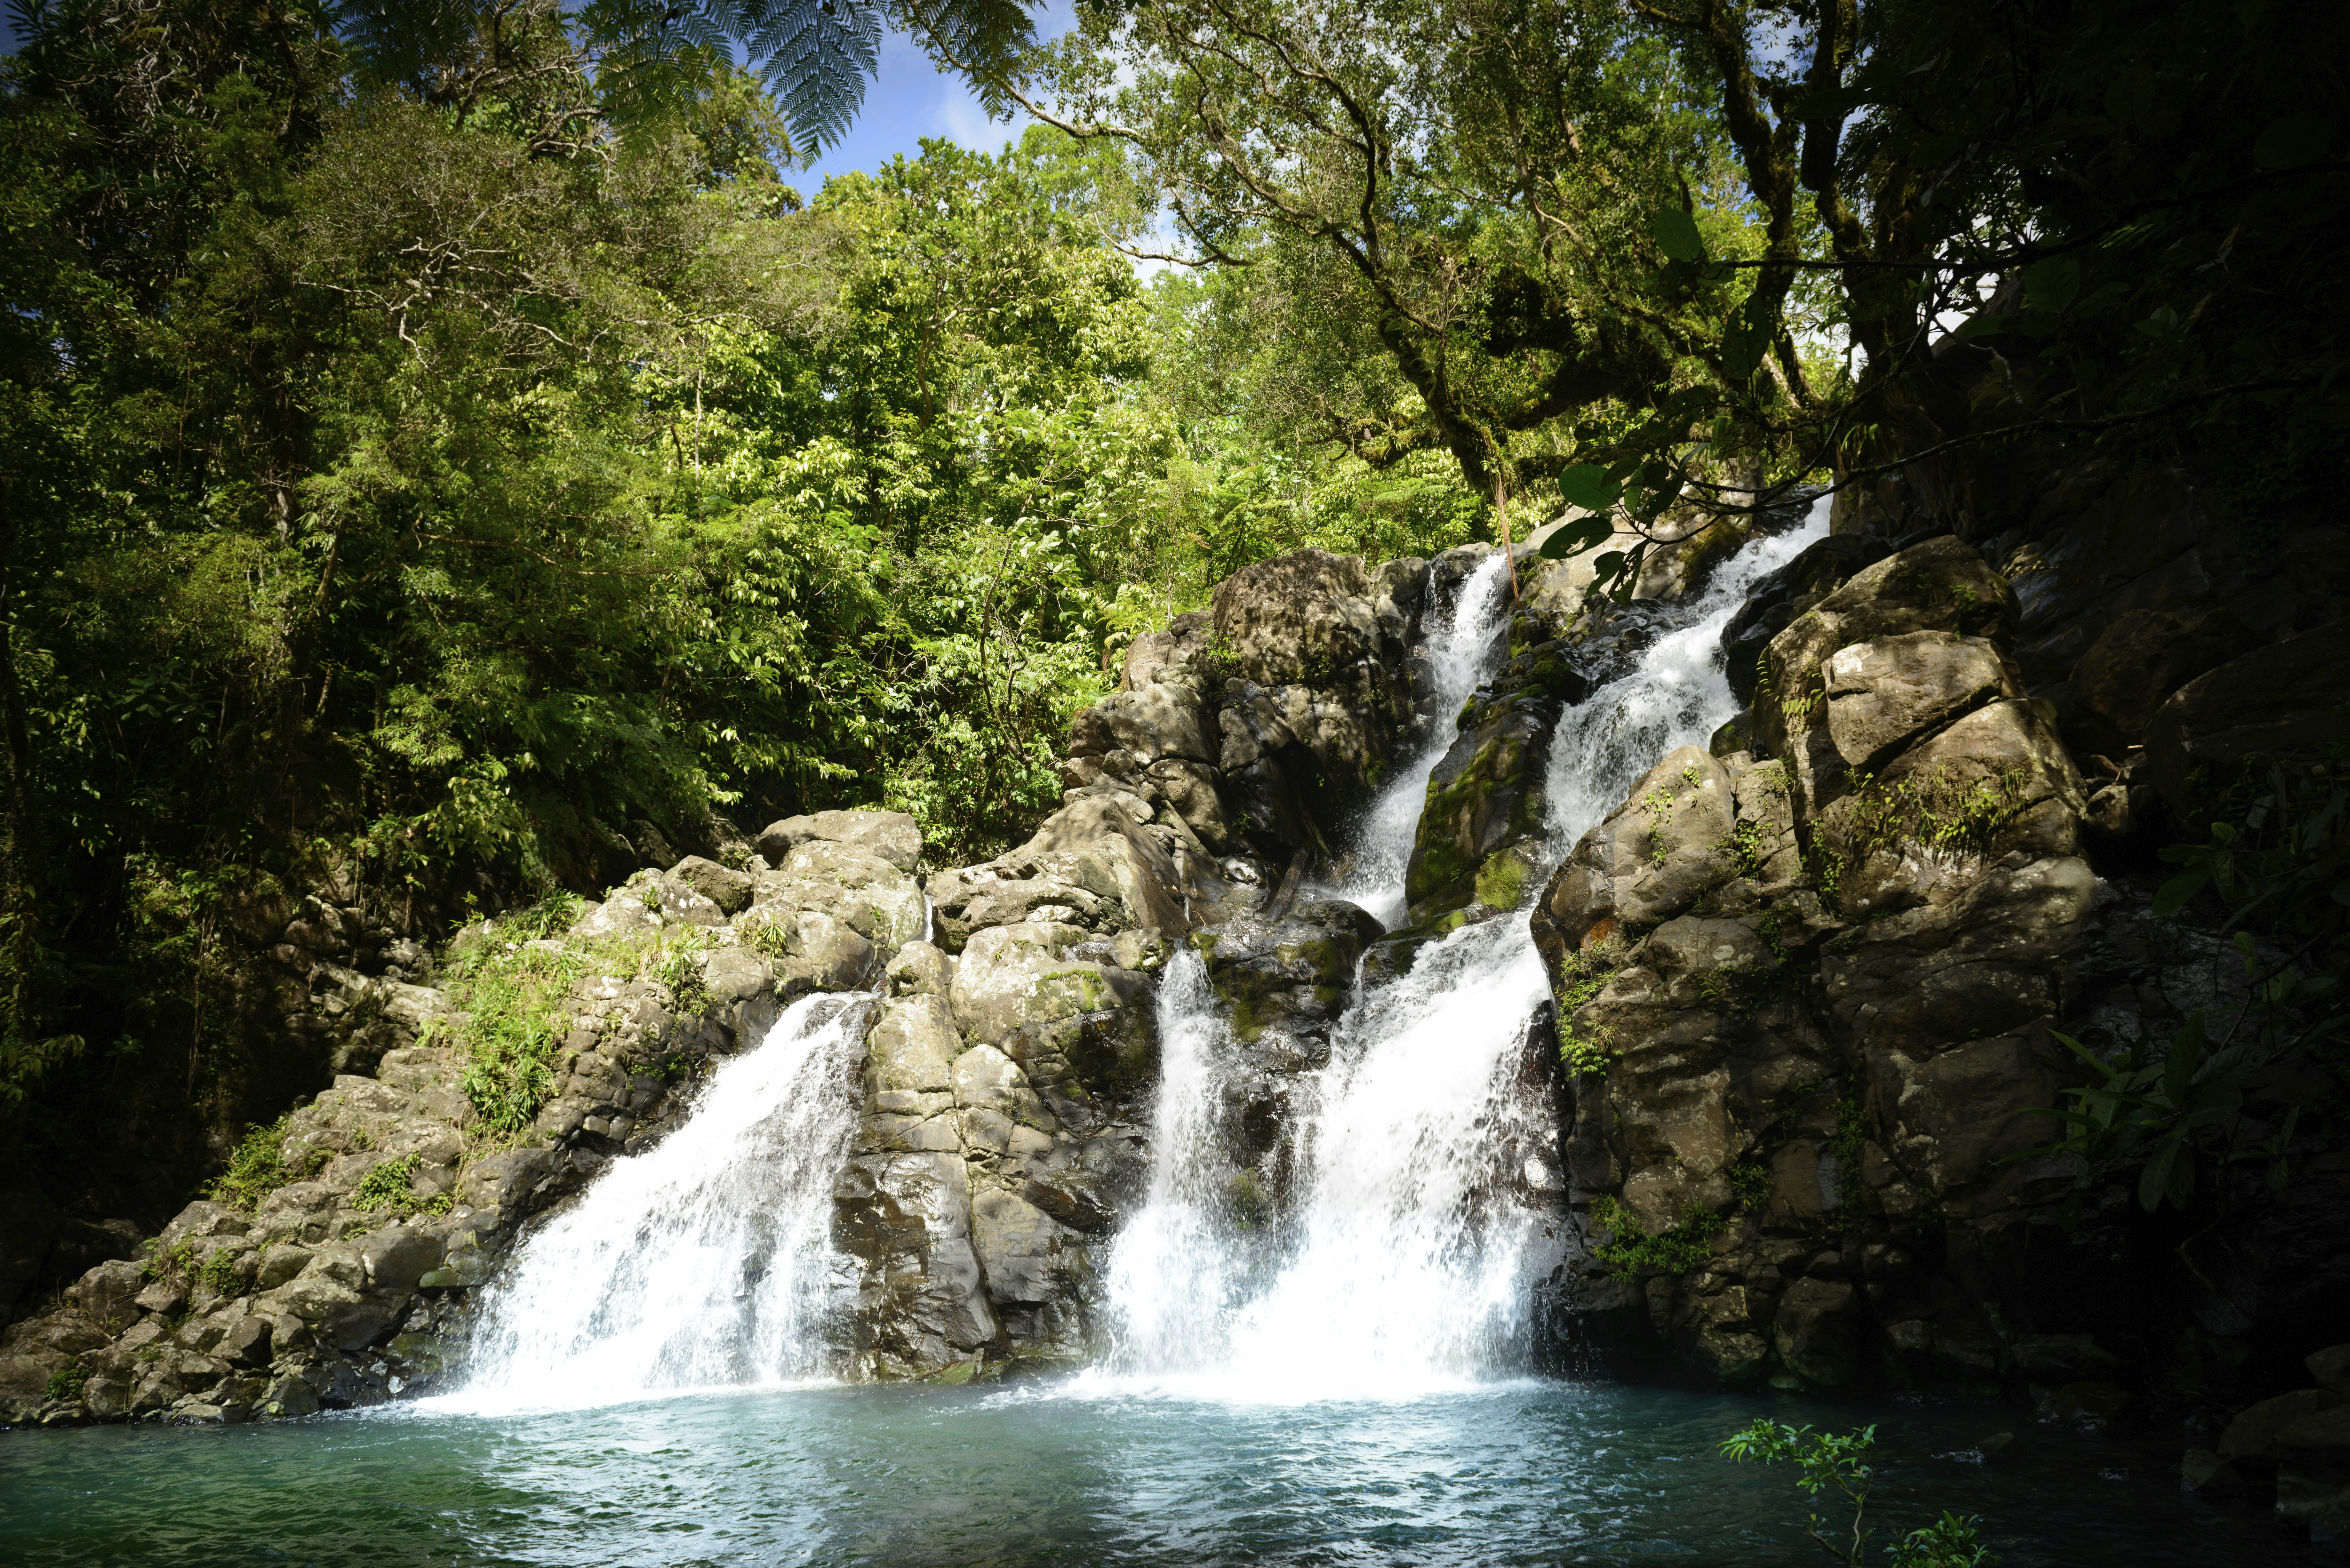 Jungle waterfall, deep in the jungle of the island of Taveuni where Fantasy Island was filmed